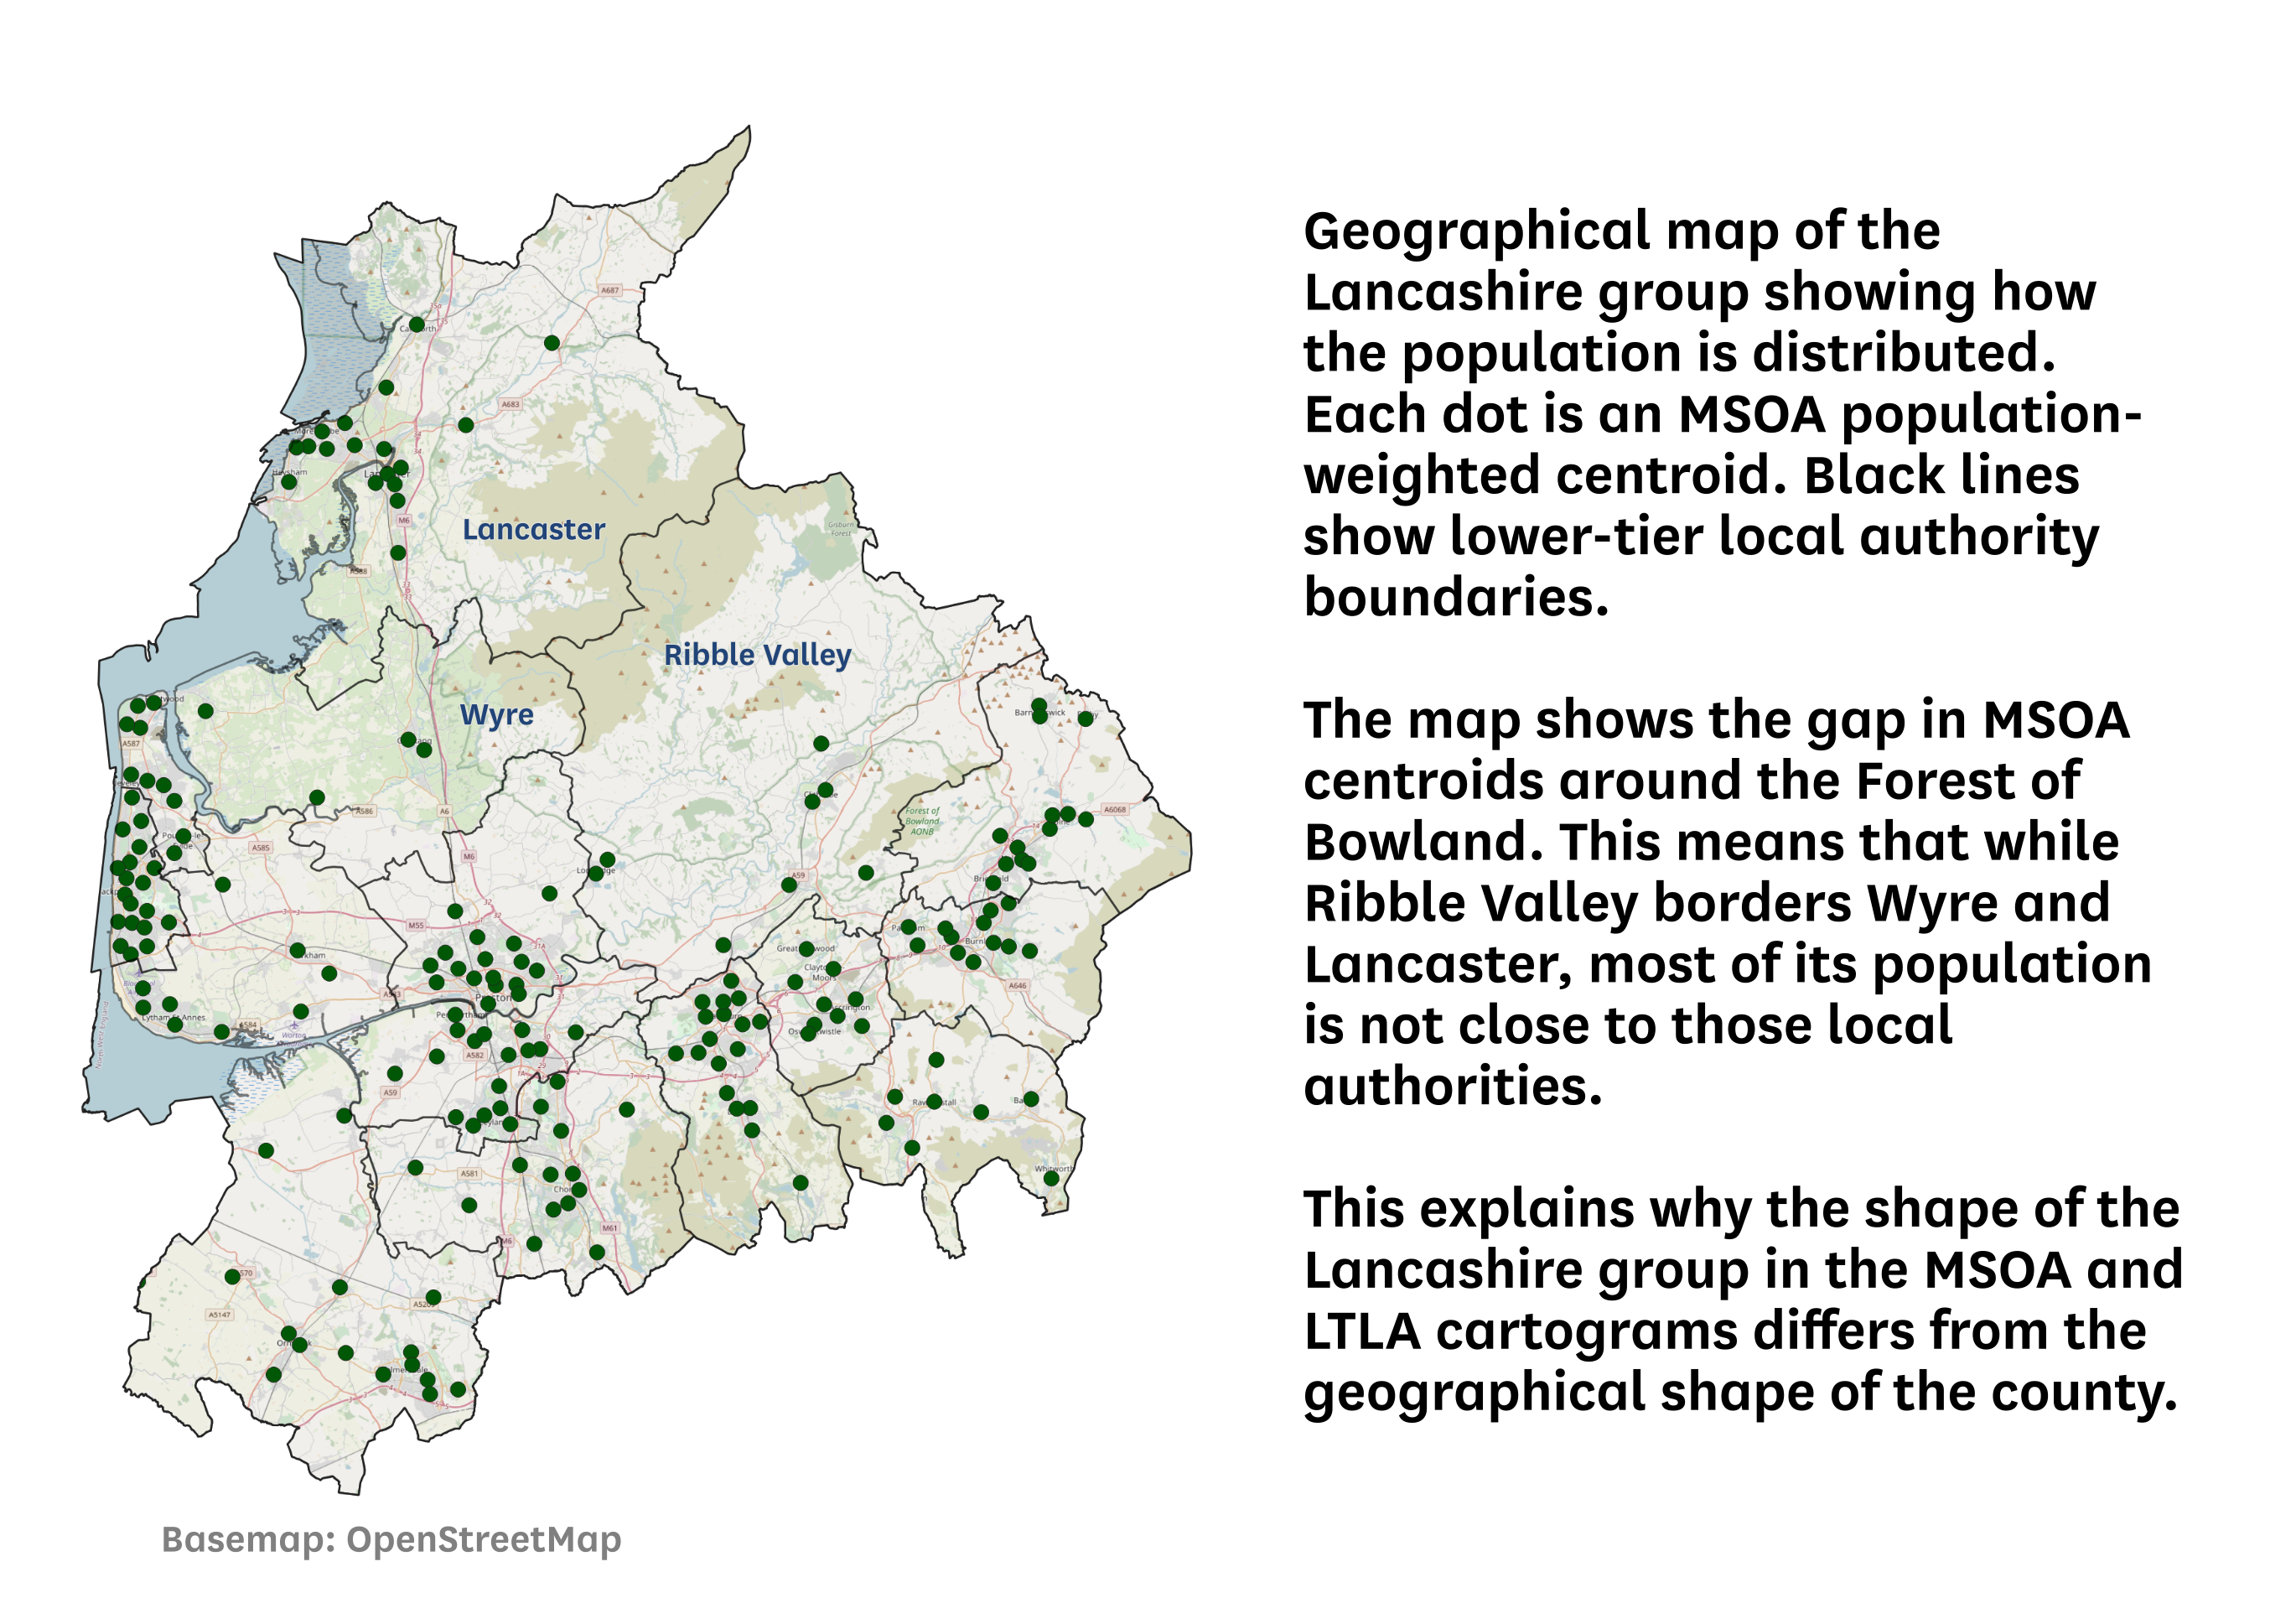 Showing the population distribution of Lancashire via MSOA population weighted centroids. Ribble Valley and Lancaster share a border but their populations are far apart.